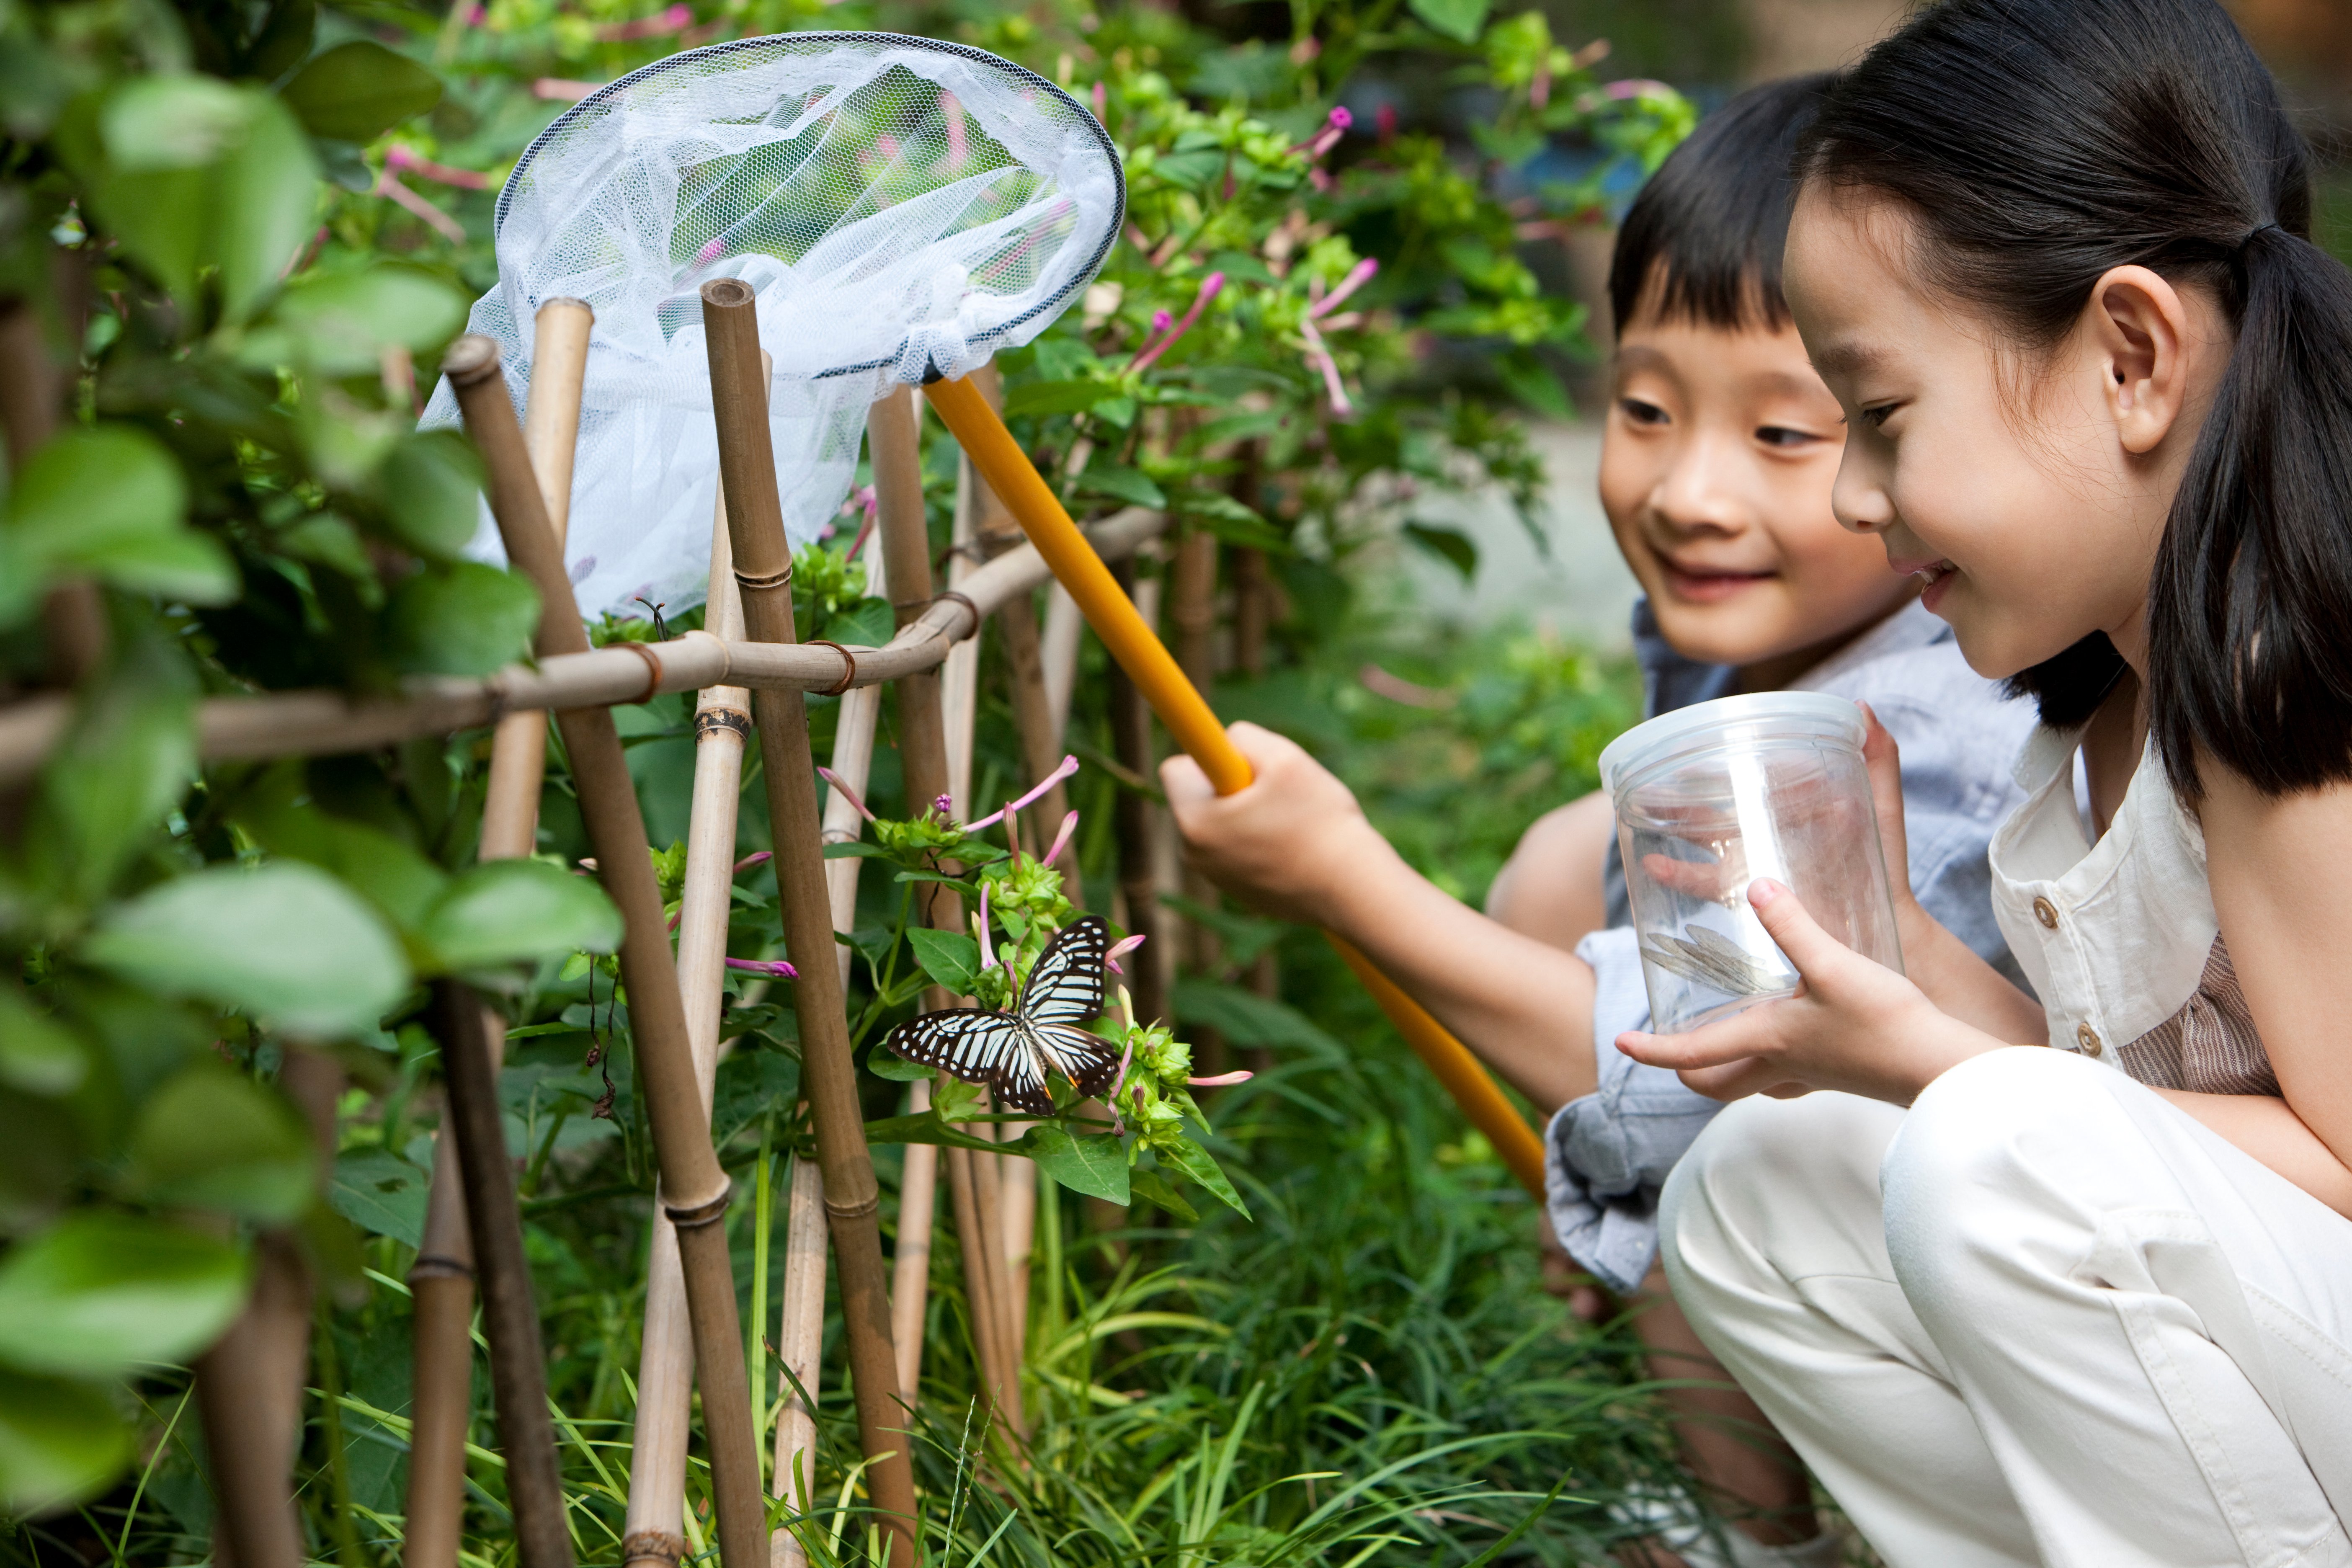 chinese-children-in-a-garden-looking-at-a-butterfl-2022-04-02-01-56-41-utc